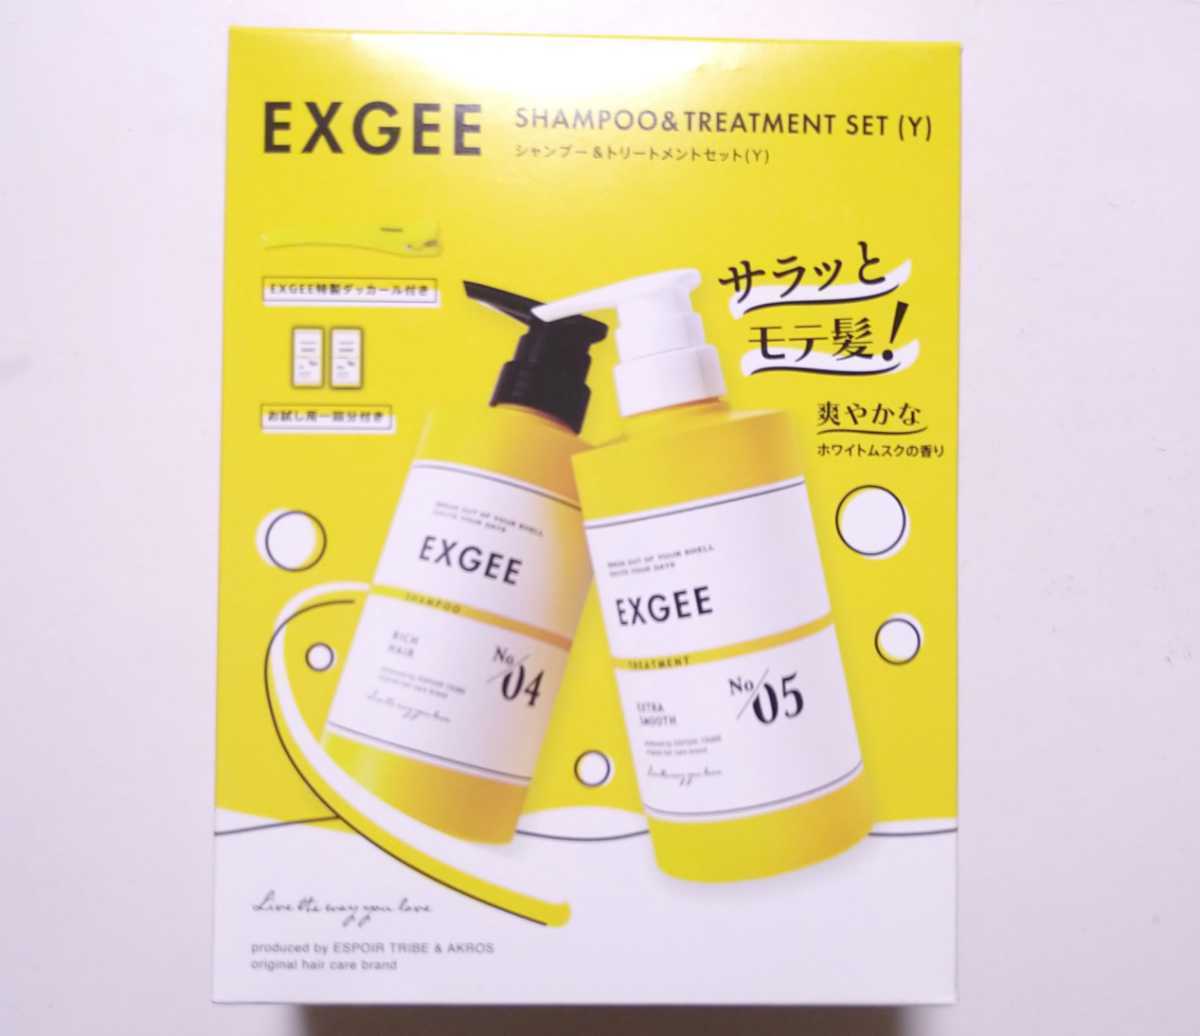 EXGEE エグジー シャンプー＆トリートメントセット 通販